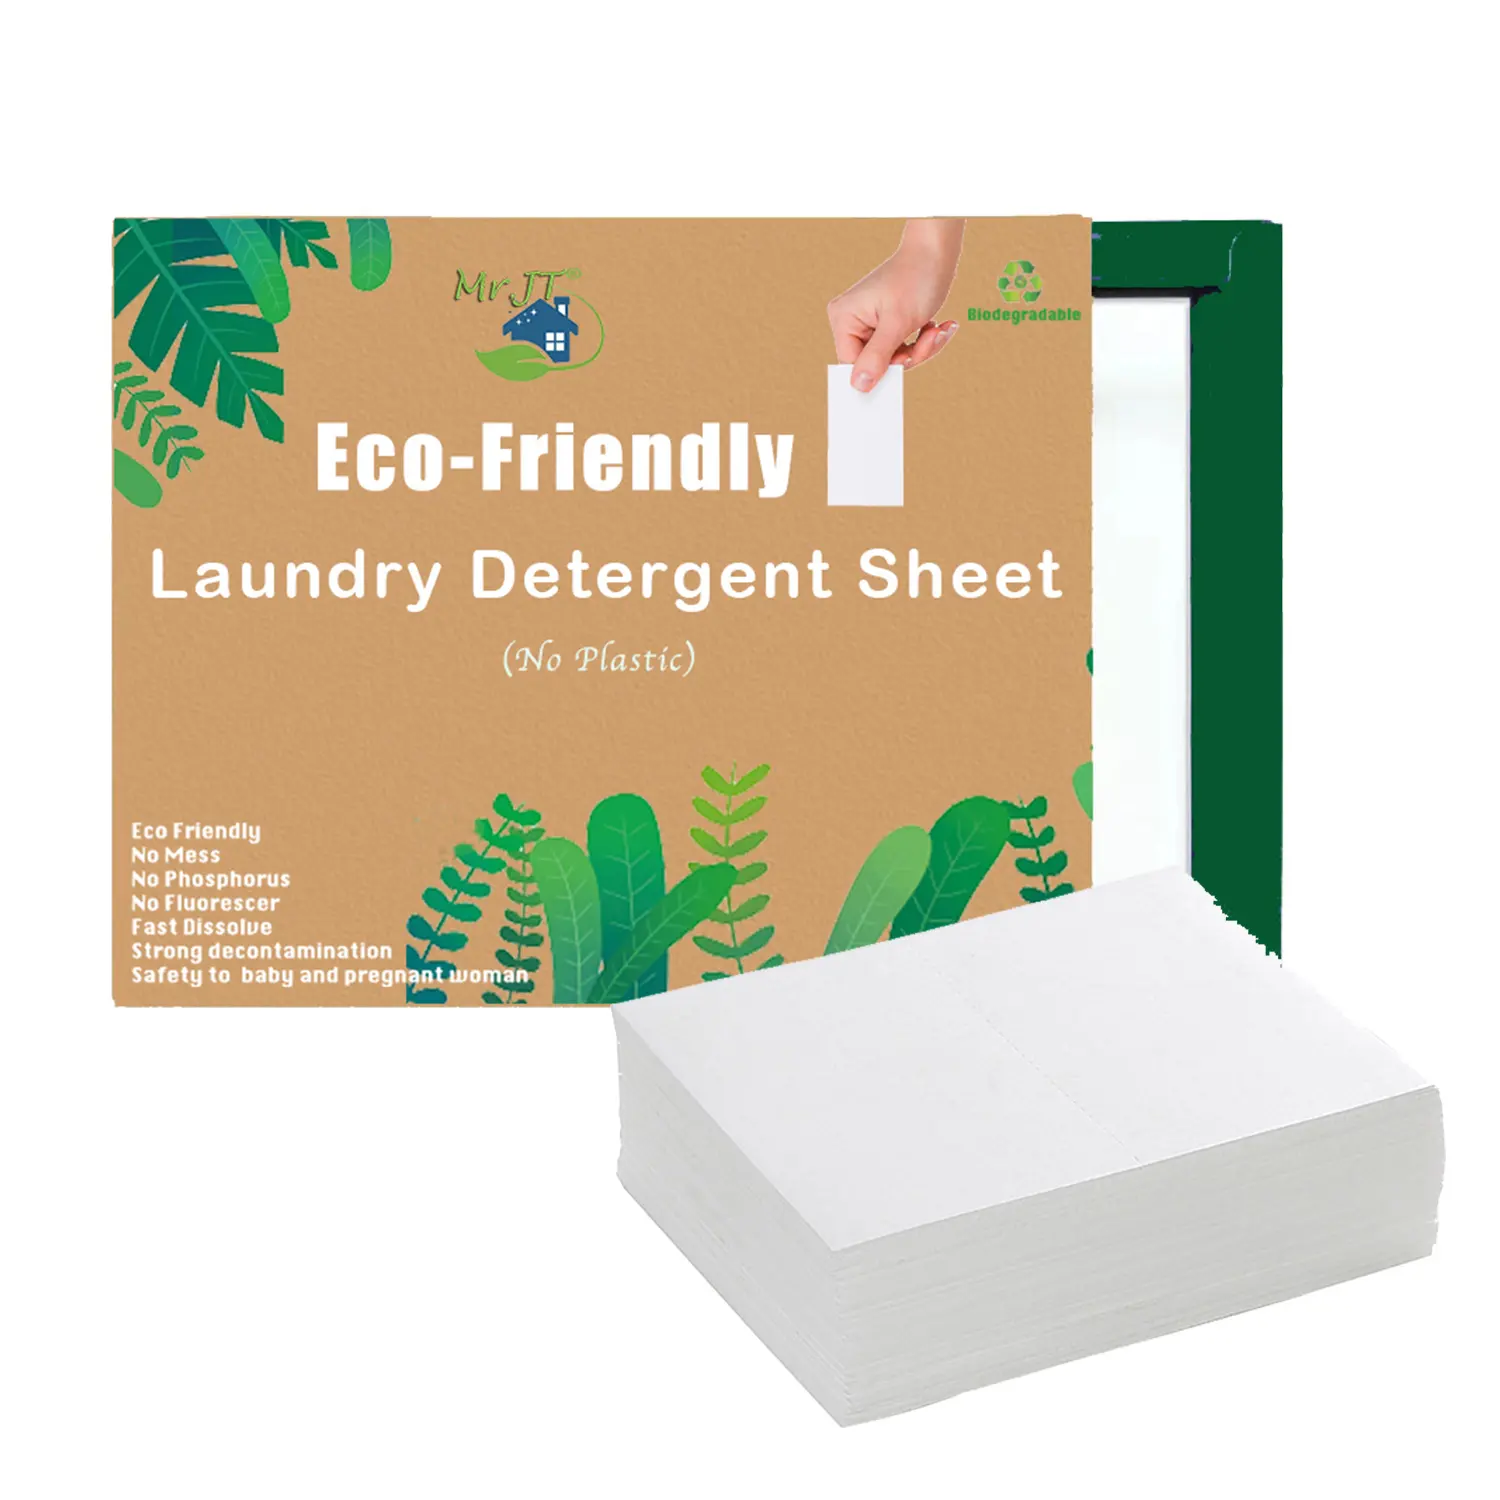 Instant laundry sheets Eco Friendly Biodegradable Laundry Detergent Strips Clean concentrated laundry sheets